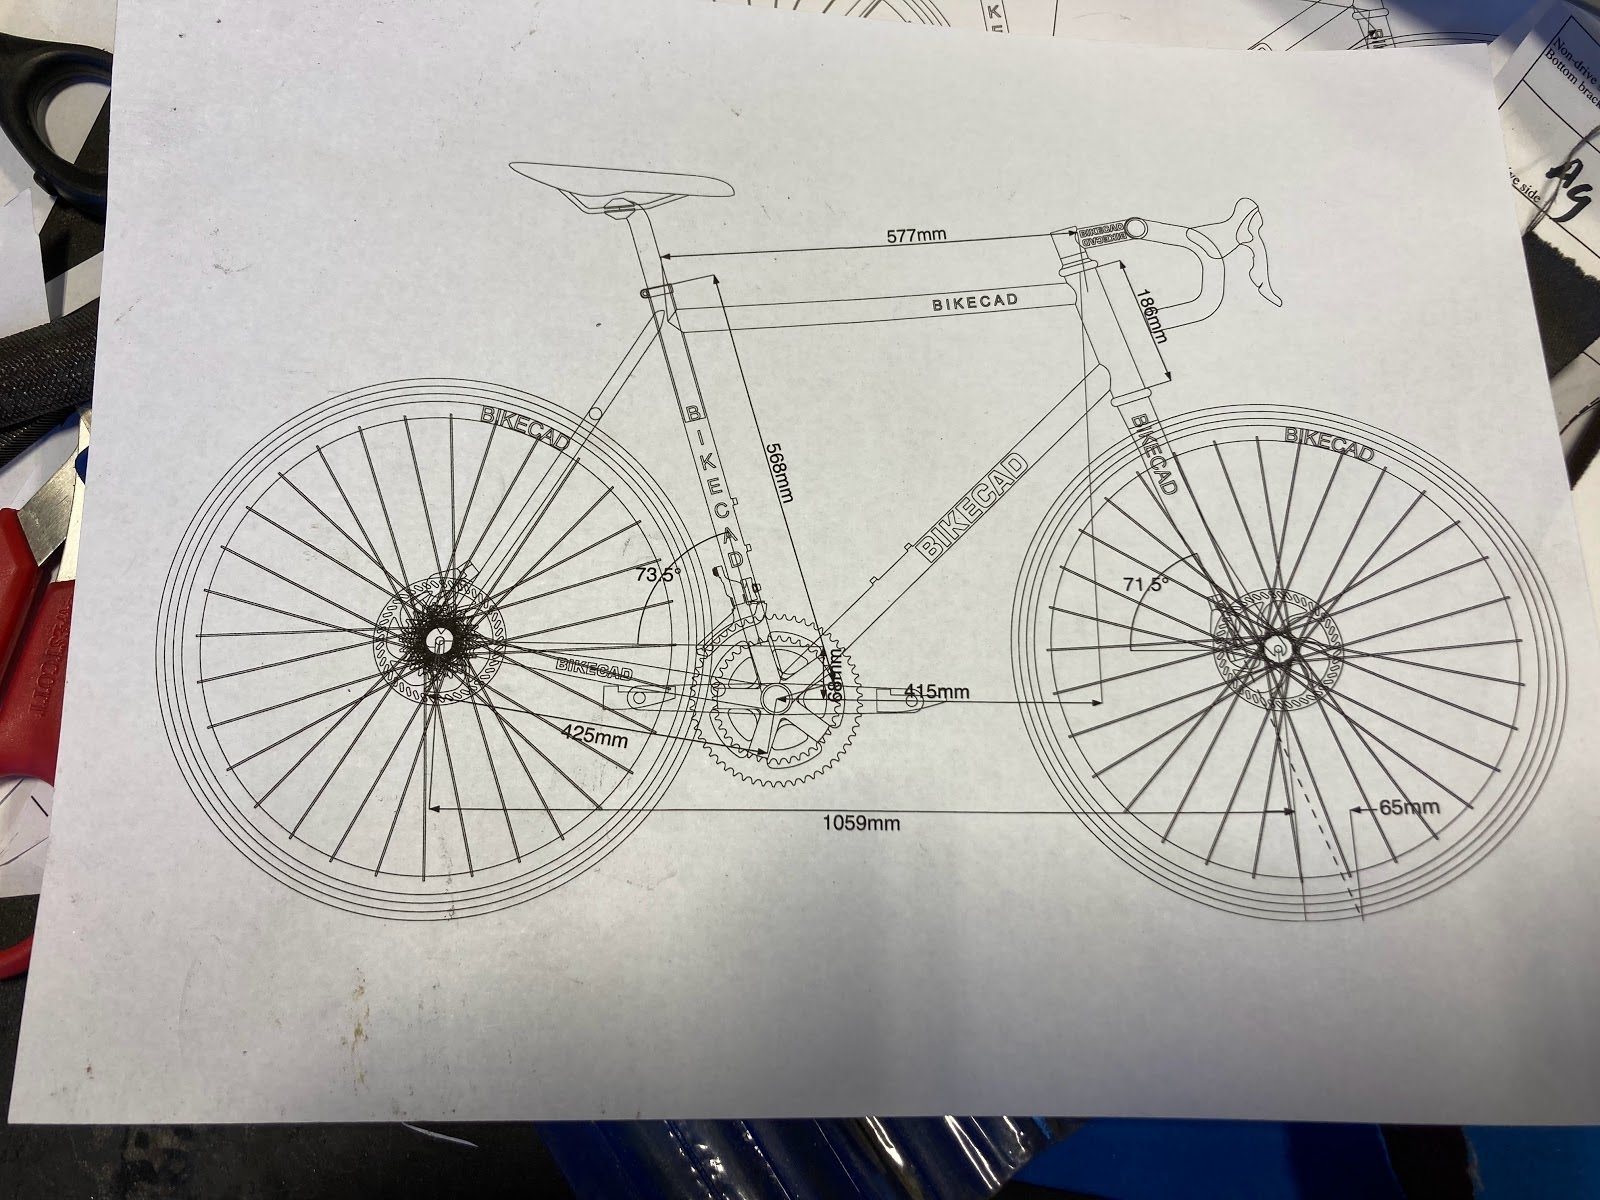  Some primary dimensions listed on final frame design from BikeCAD. 